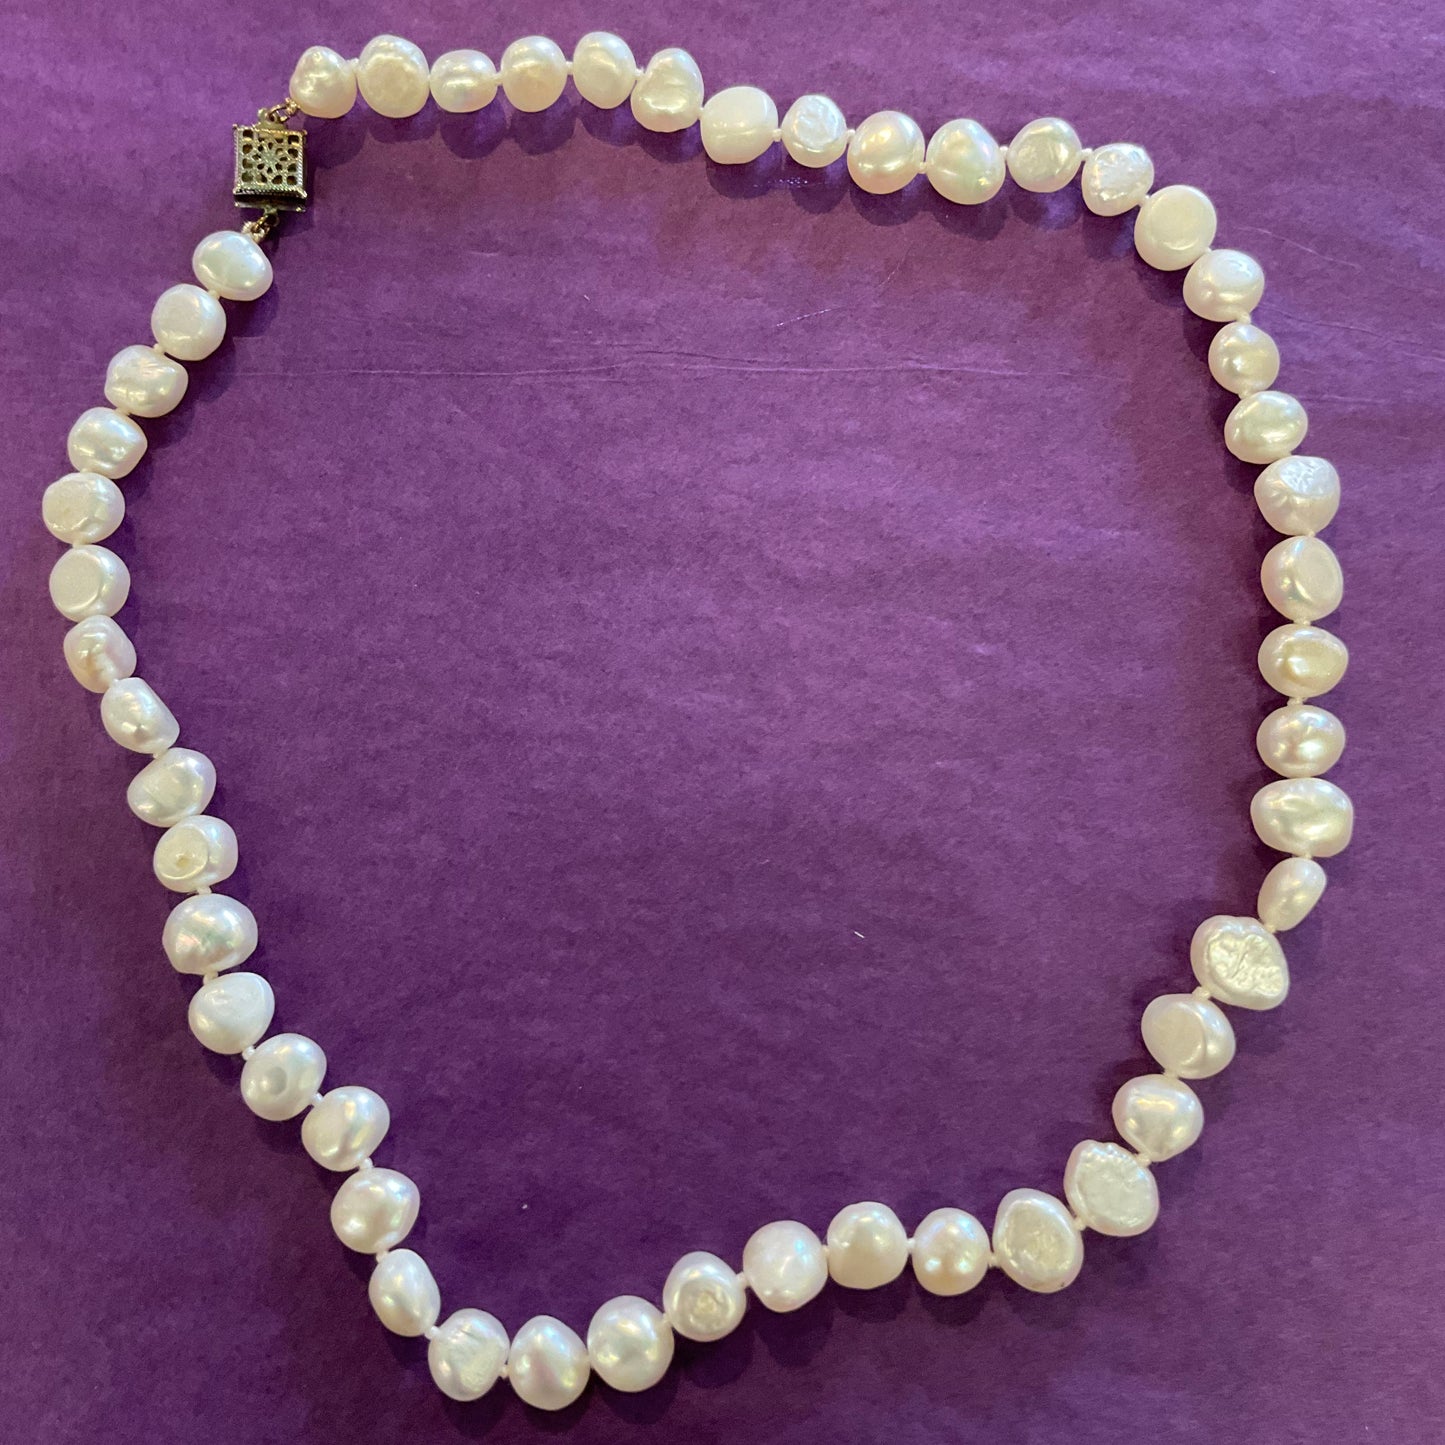 Vintage Ivory/white Fresh water pearl beaded necklace with silver (1120) clasp, wedding, prom, Gift for her.